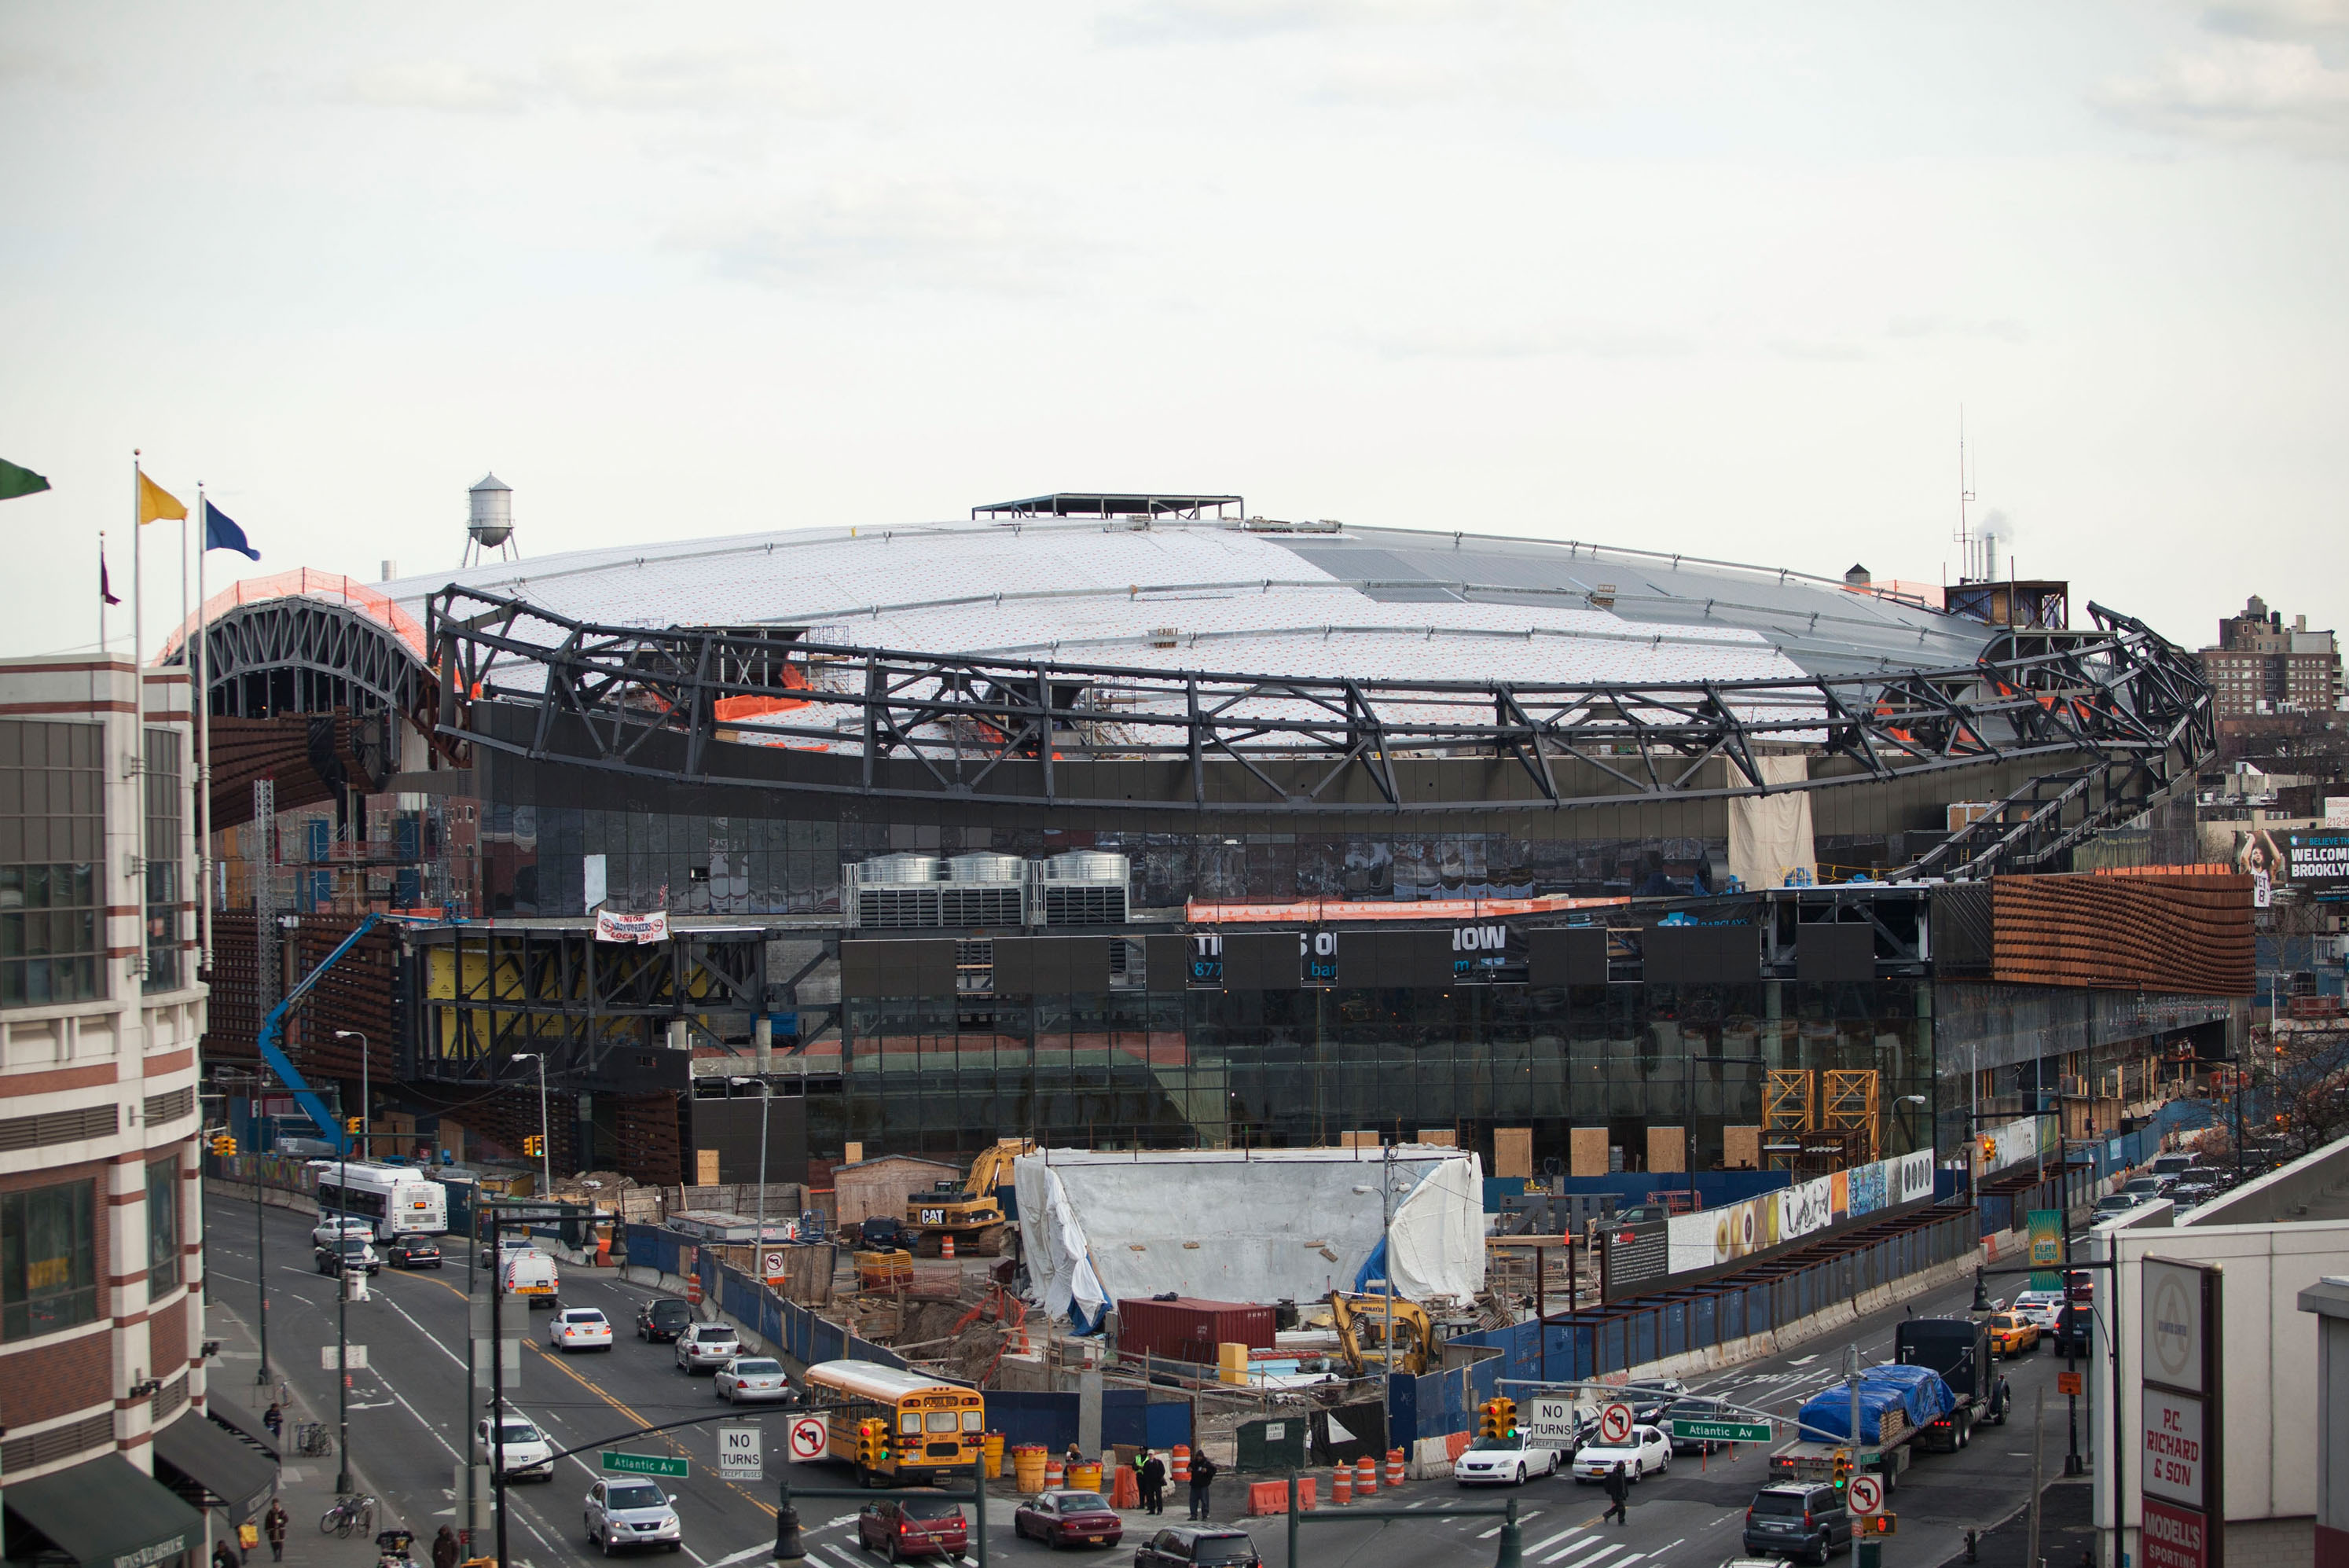 Barclays Center to welcome limited number of fans back